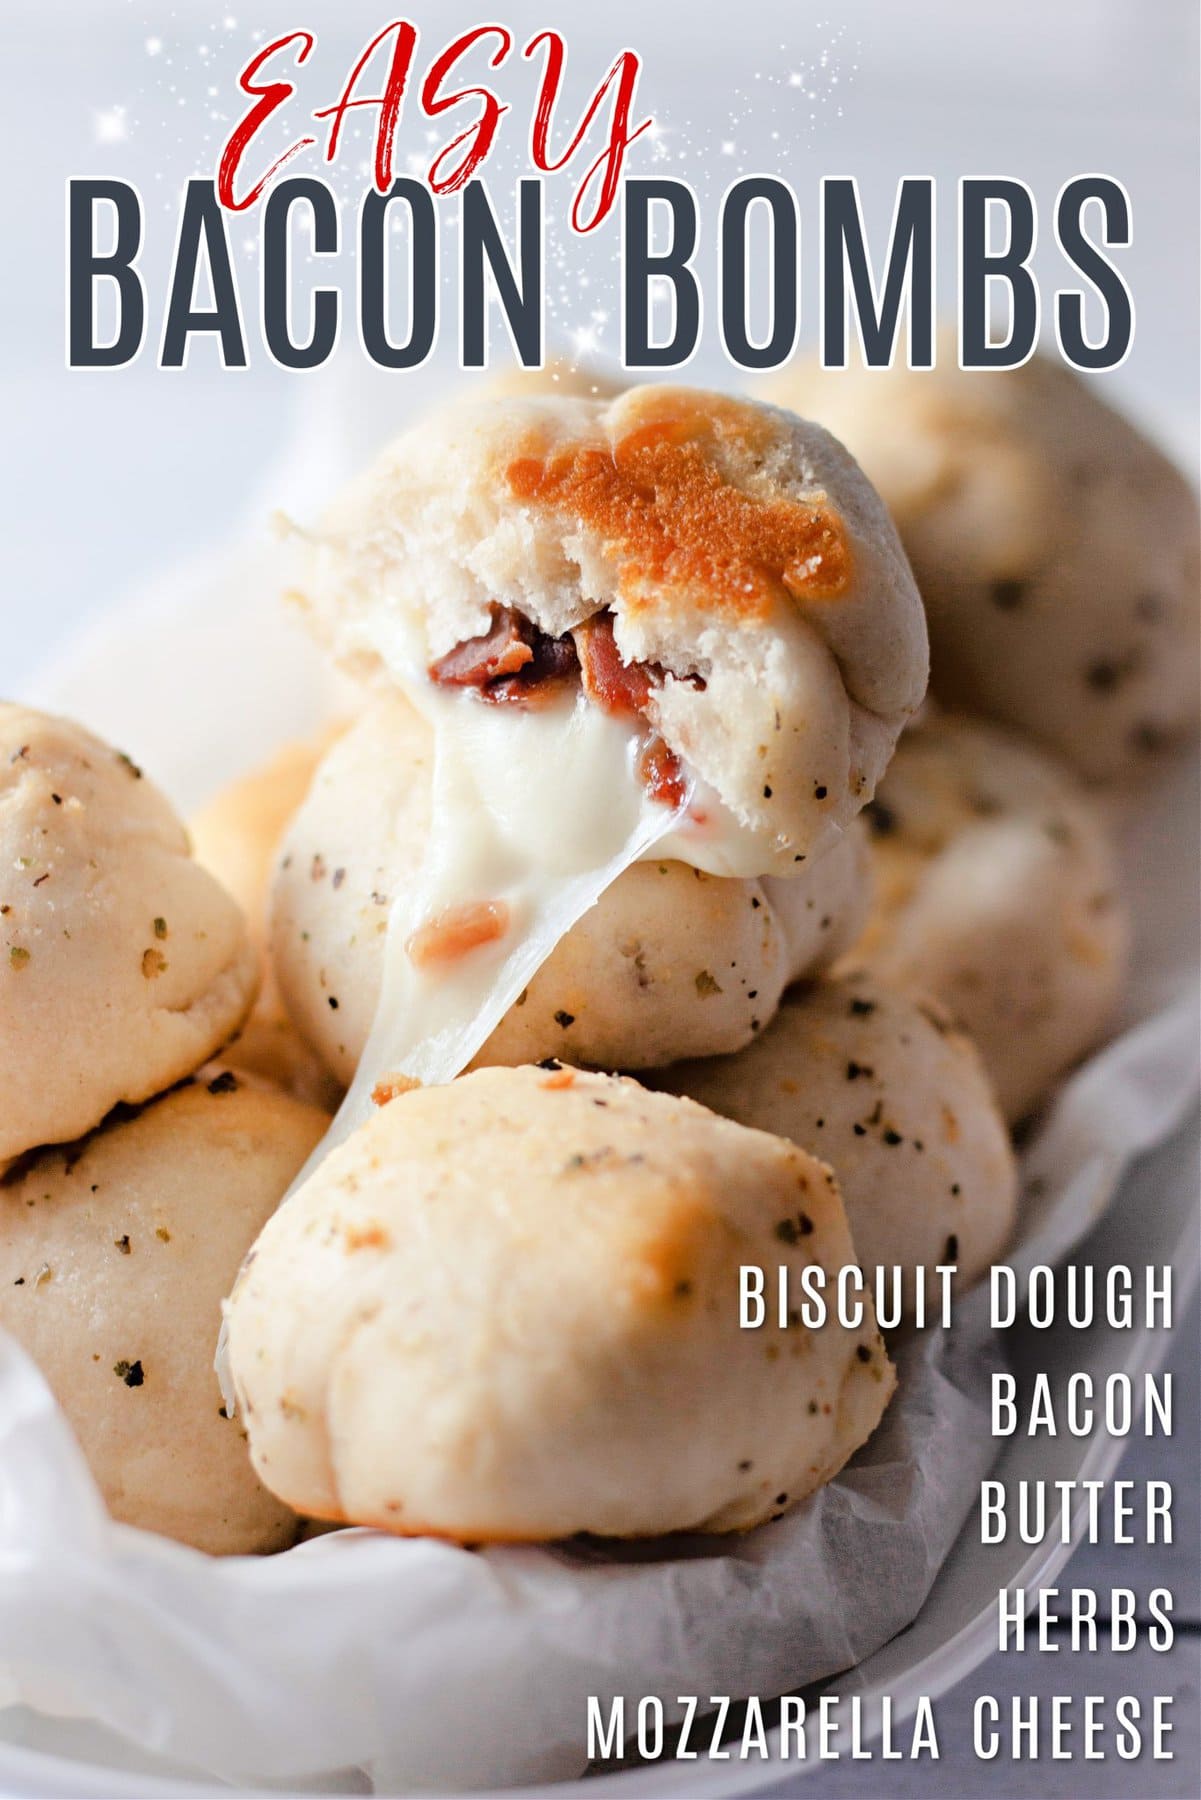 Title image for Cheesy Bacon Bombs.